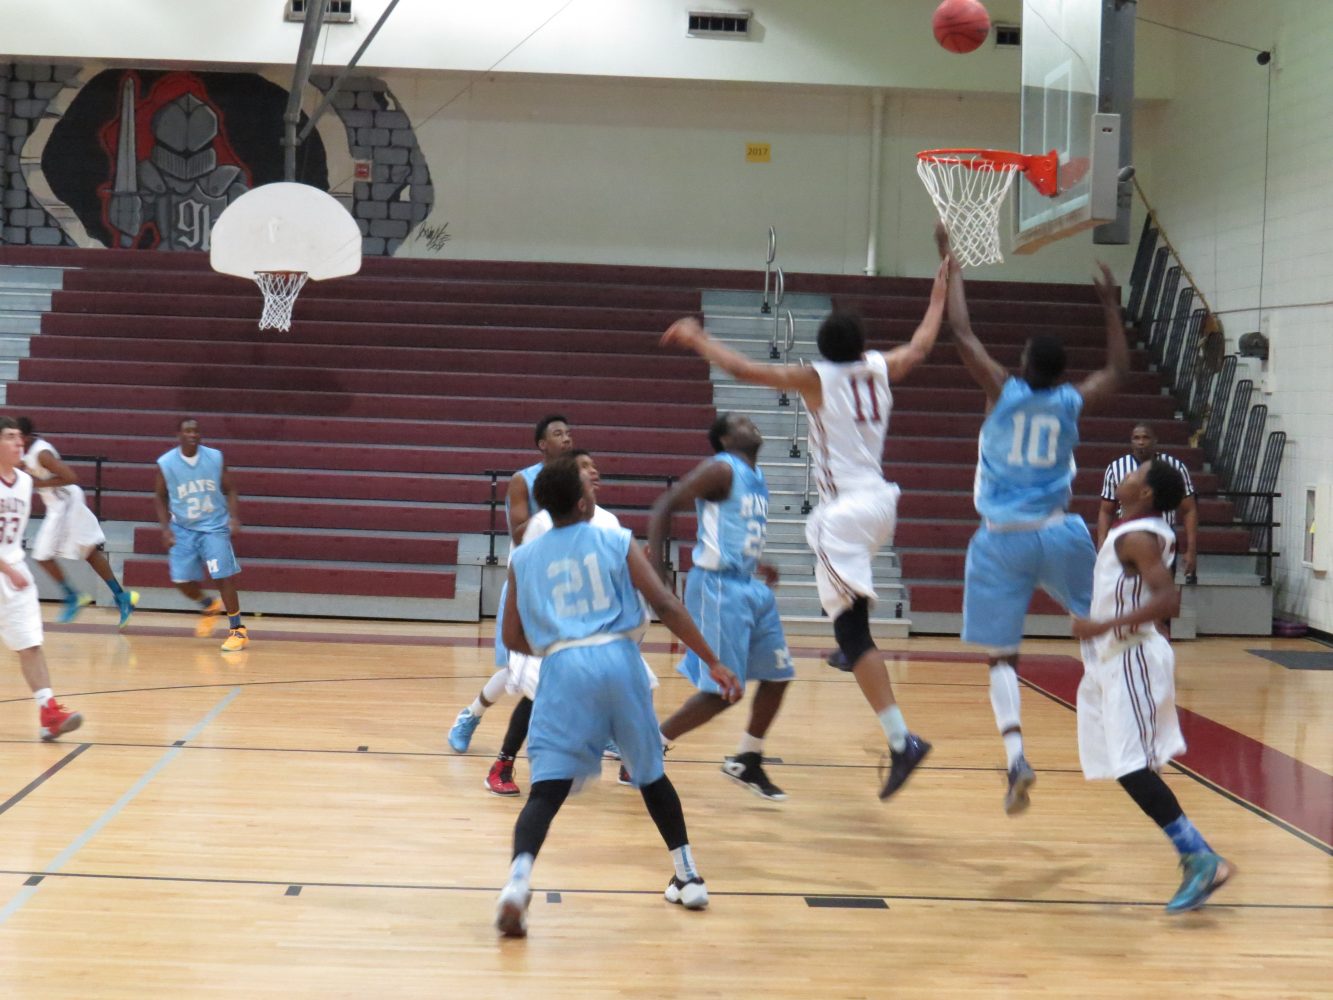 Both boys teams attempt to possess the rebound.